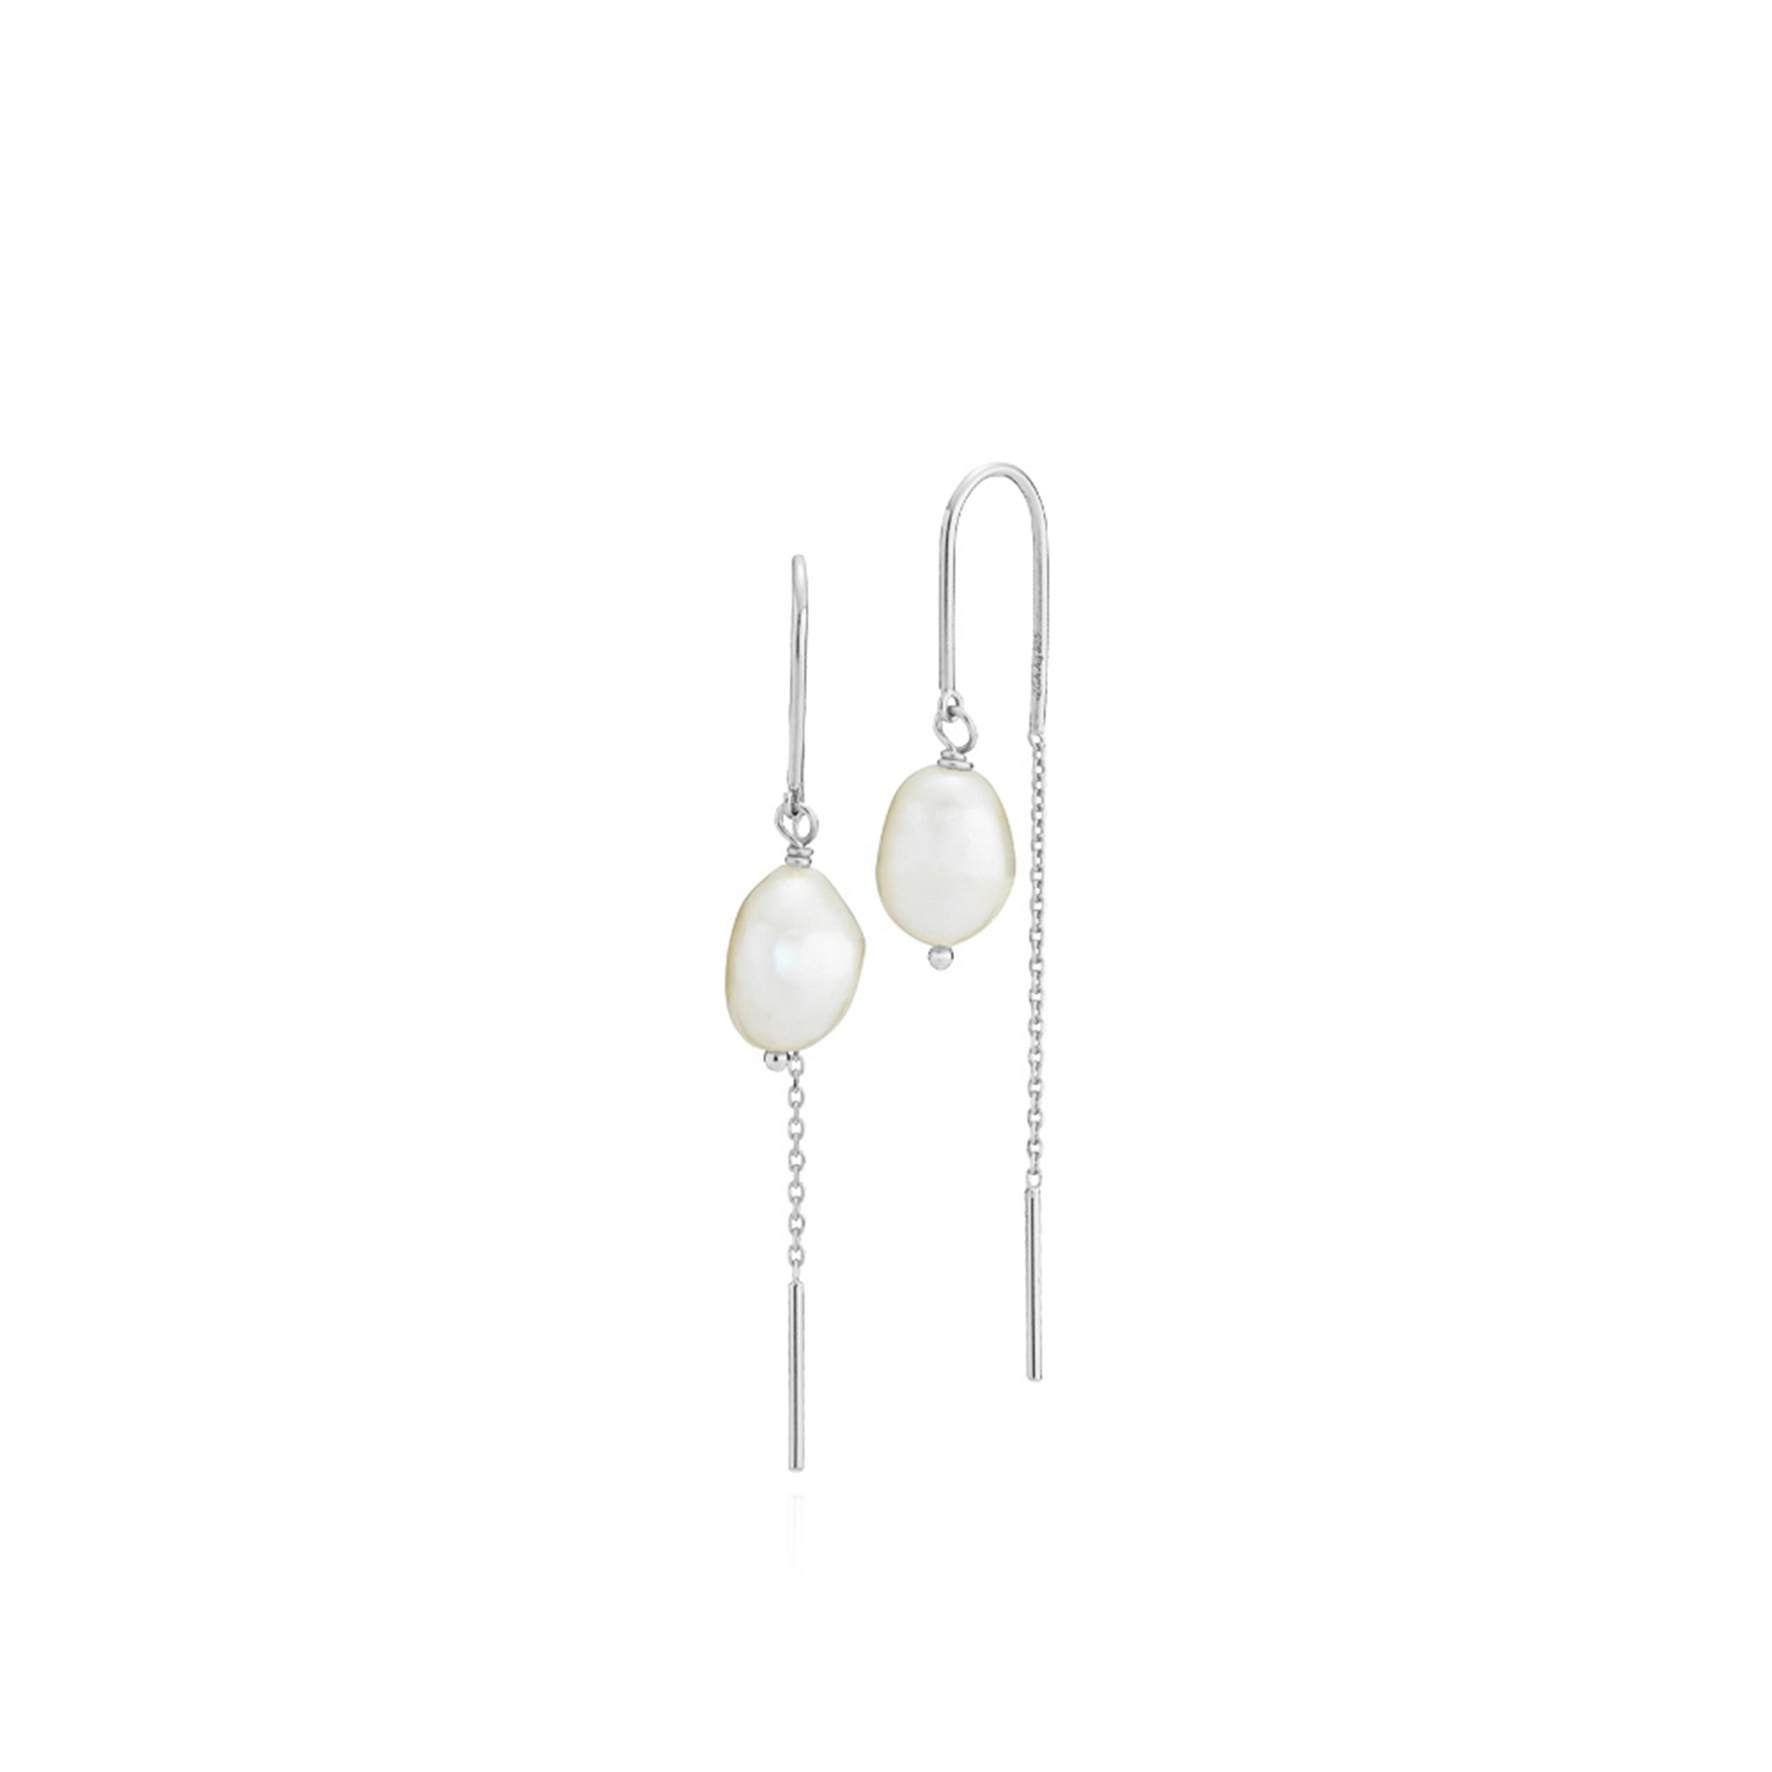 Caley Earchain With Pearl von Izabel Camille in Silber Sterling 925